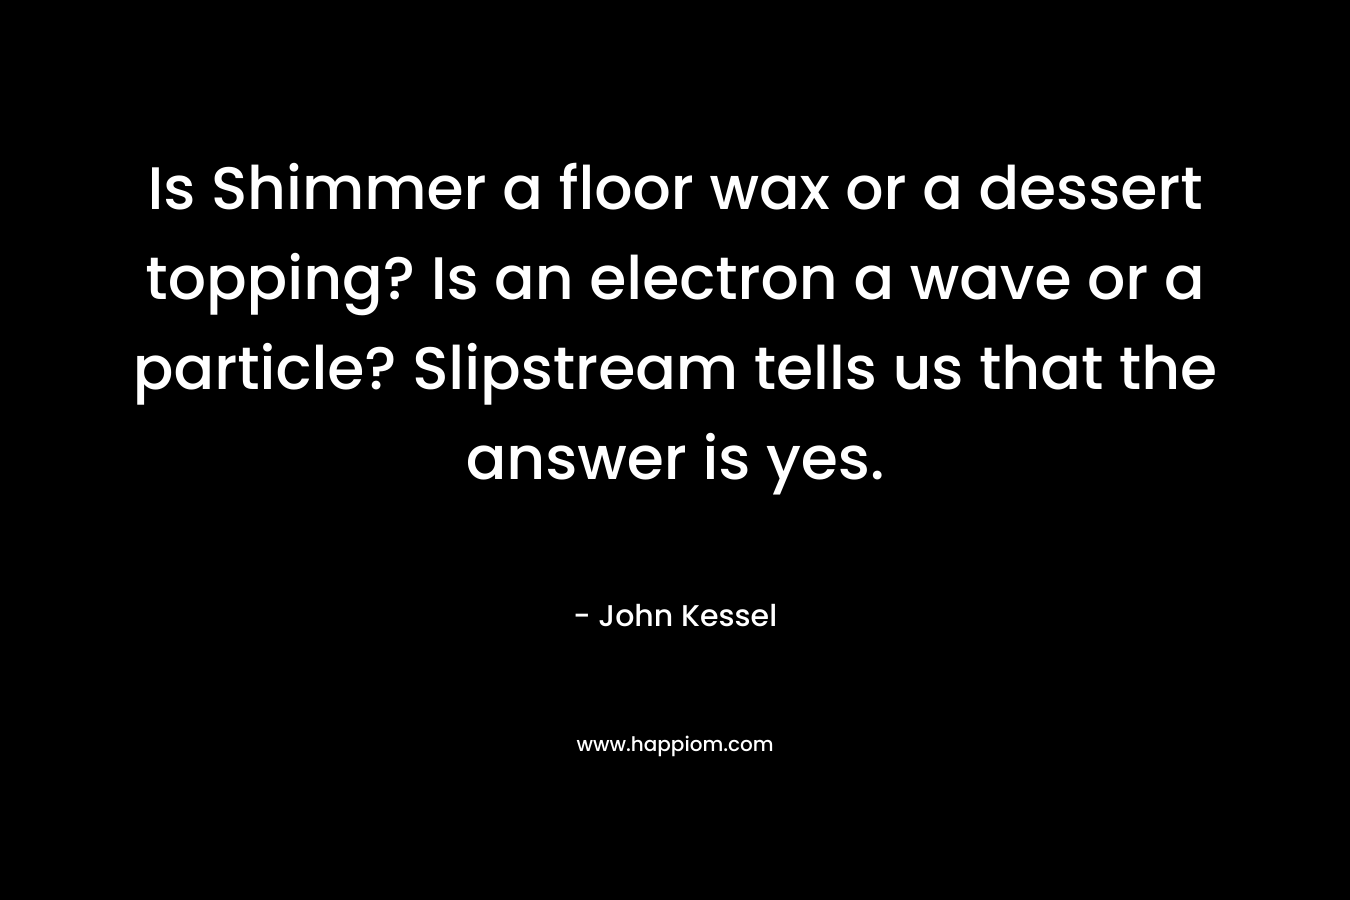 Is Shimmer a floor wax or a dessert topping? Is an electron a wave or a particle? Slipstream tells us that the answer is yes.